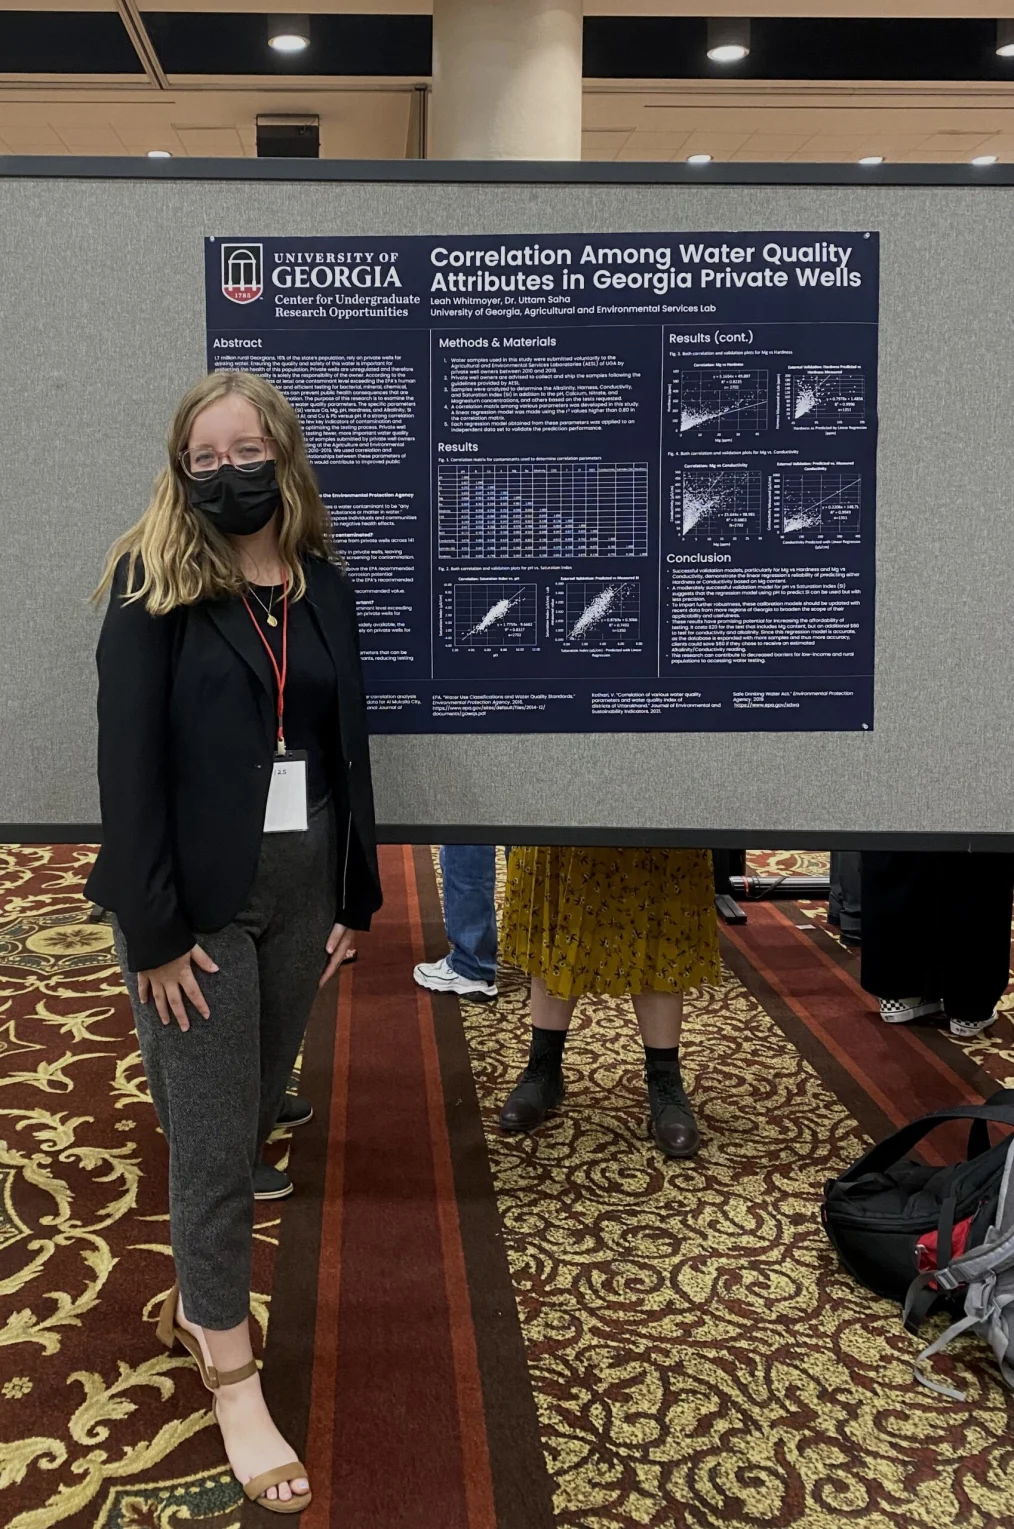 Leah Whitmoyer presents water quality research at the University of Georgia undergraduate research symposium. She is wearing glasses and a face mask as she stands in front of a poster that reads, “Correlation among water quality attributes in Georgia private wells.”